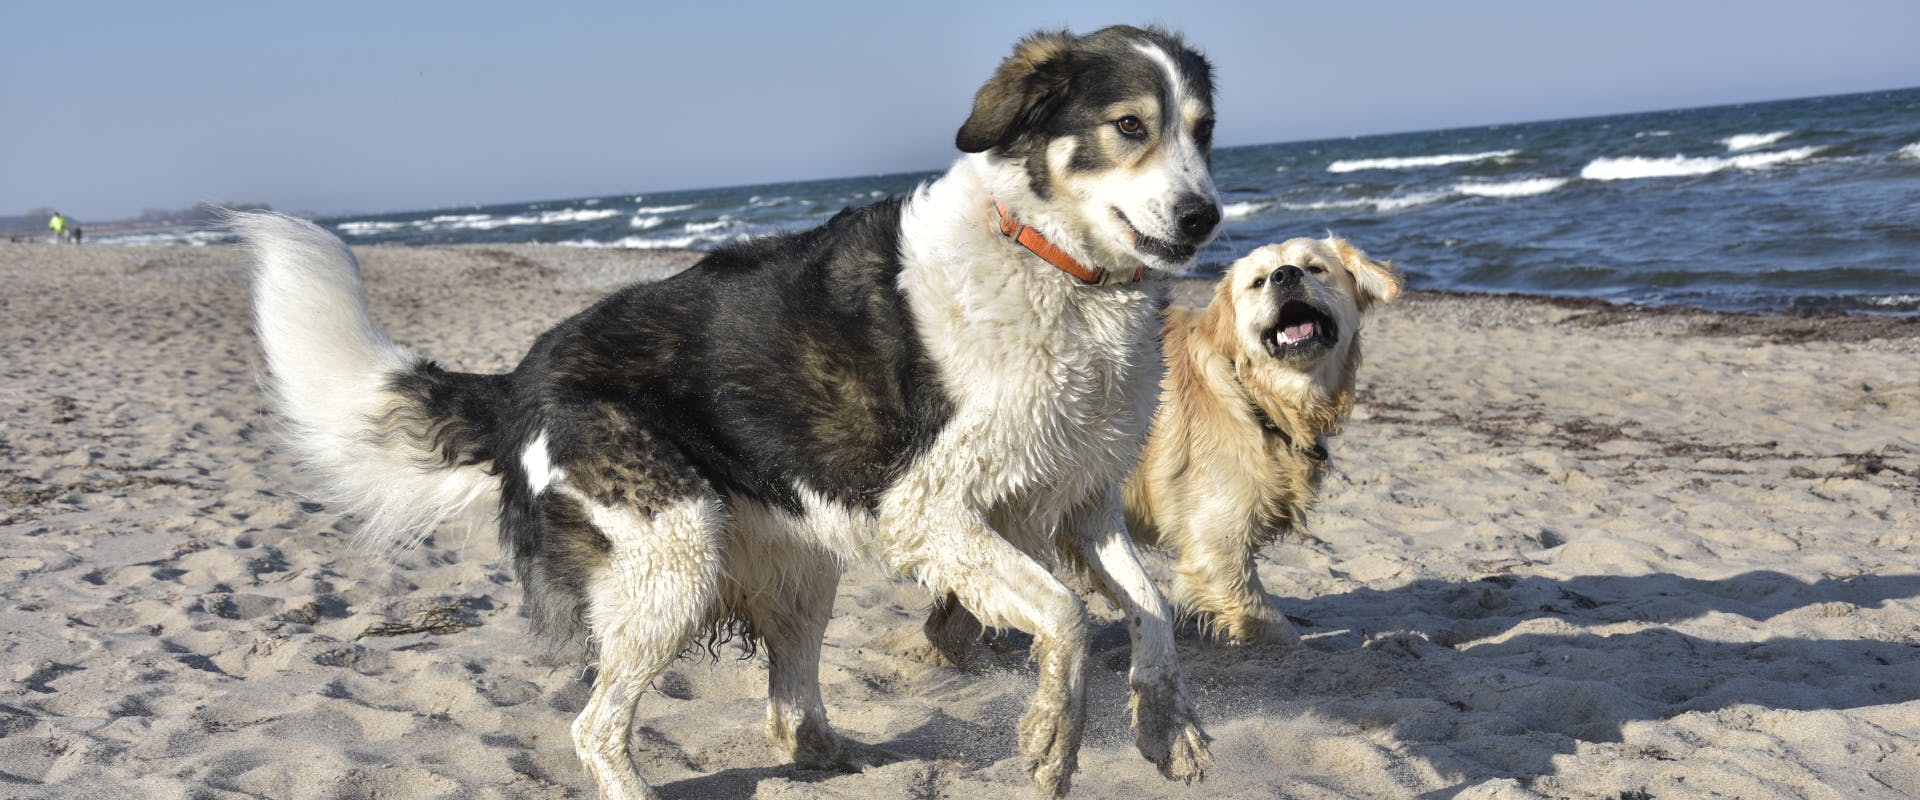 two large dogs running along a beach